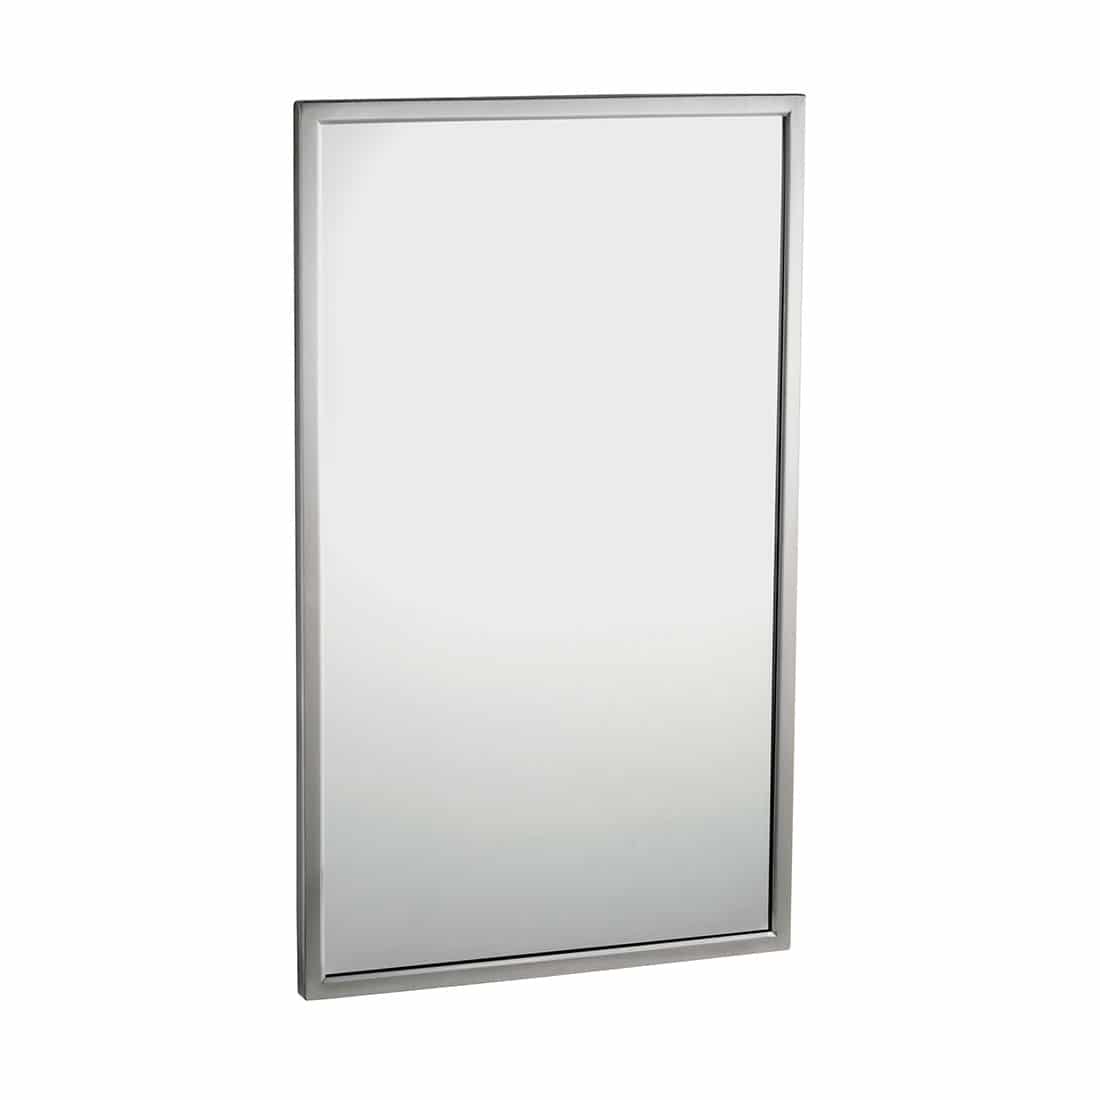 Bobrick Glass Mirror with Stainless Frame B-290 - Partition Plus